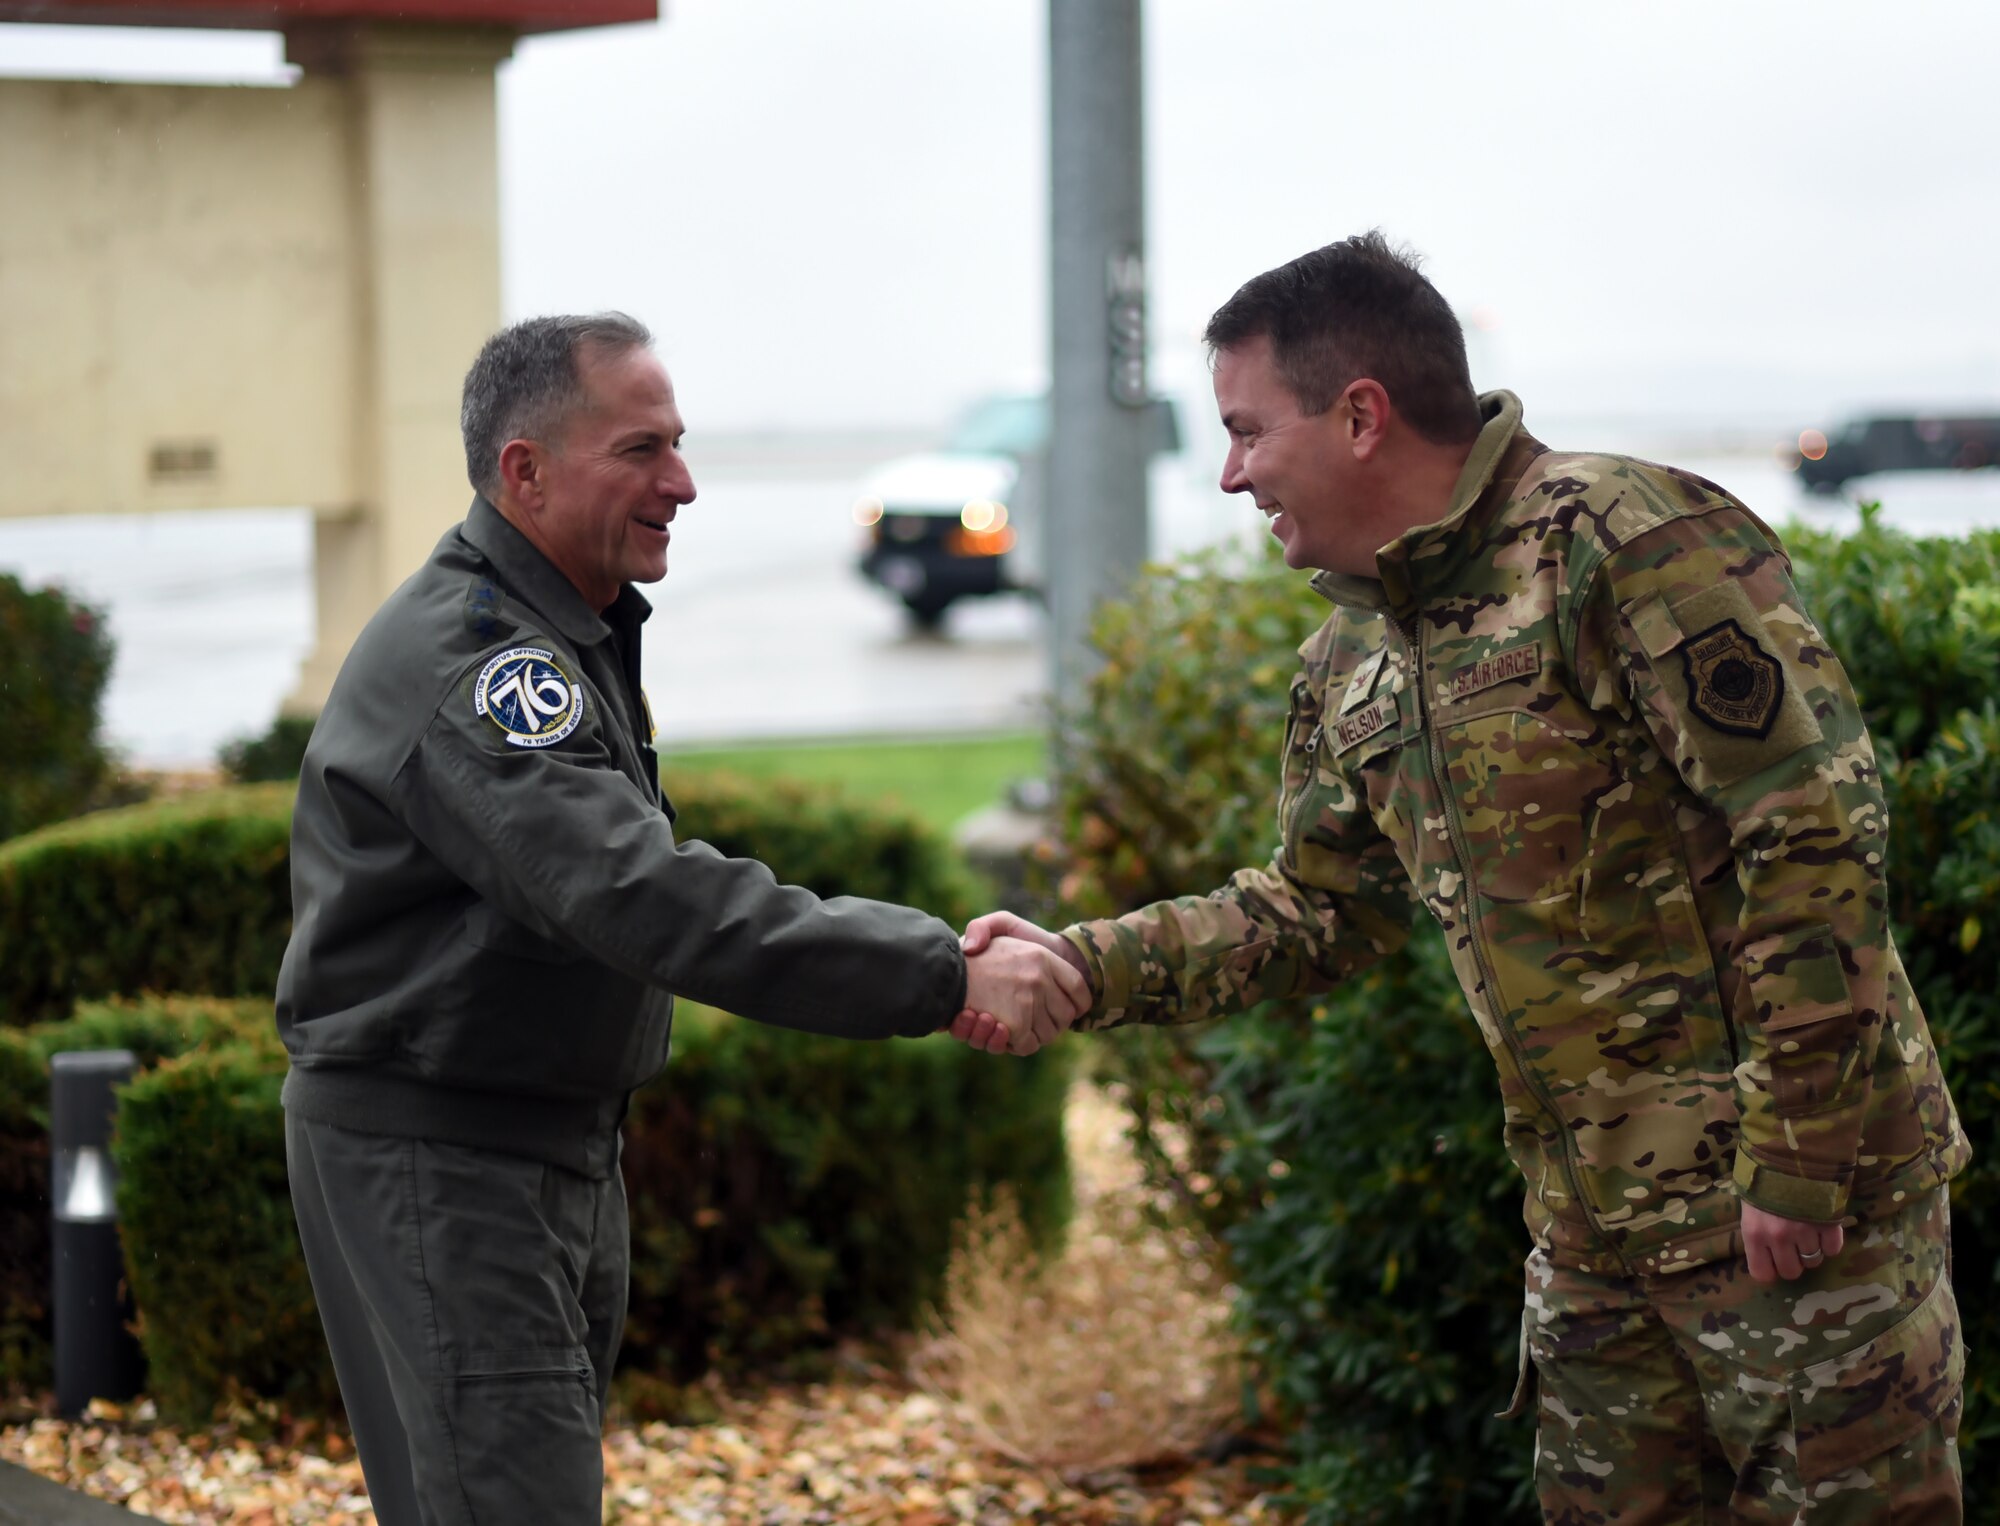 Air Force Chief of Staff Gen. David L. Goldfein greets Col. Jeff Nelson, 60th Air Mobility Wing commander.